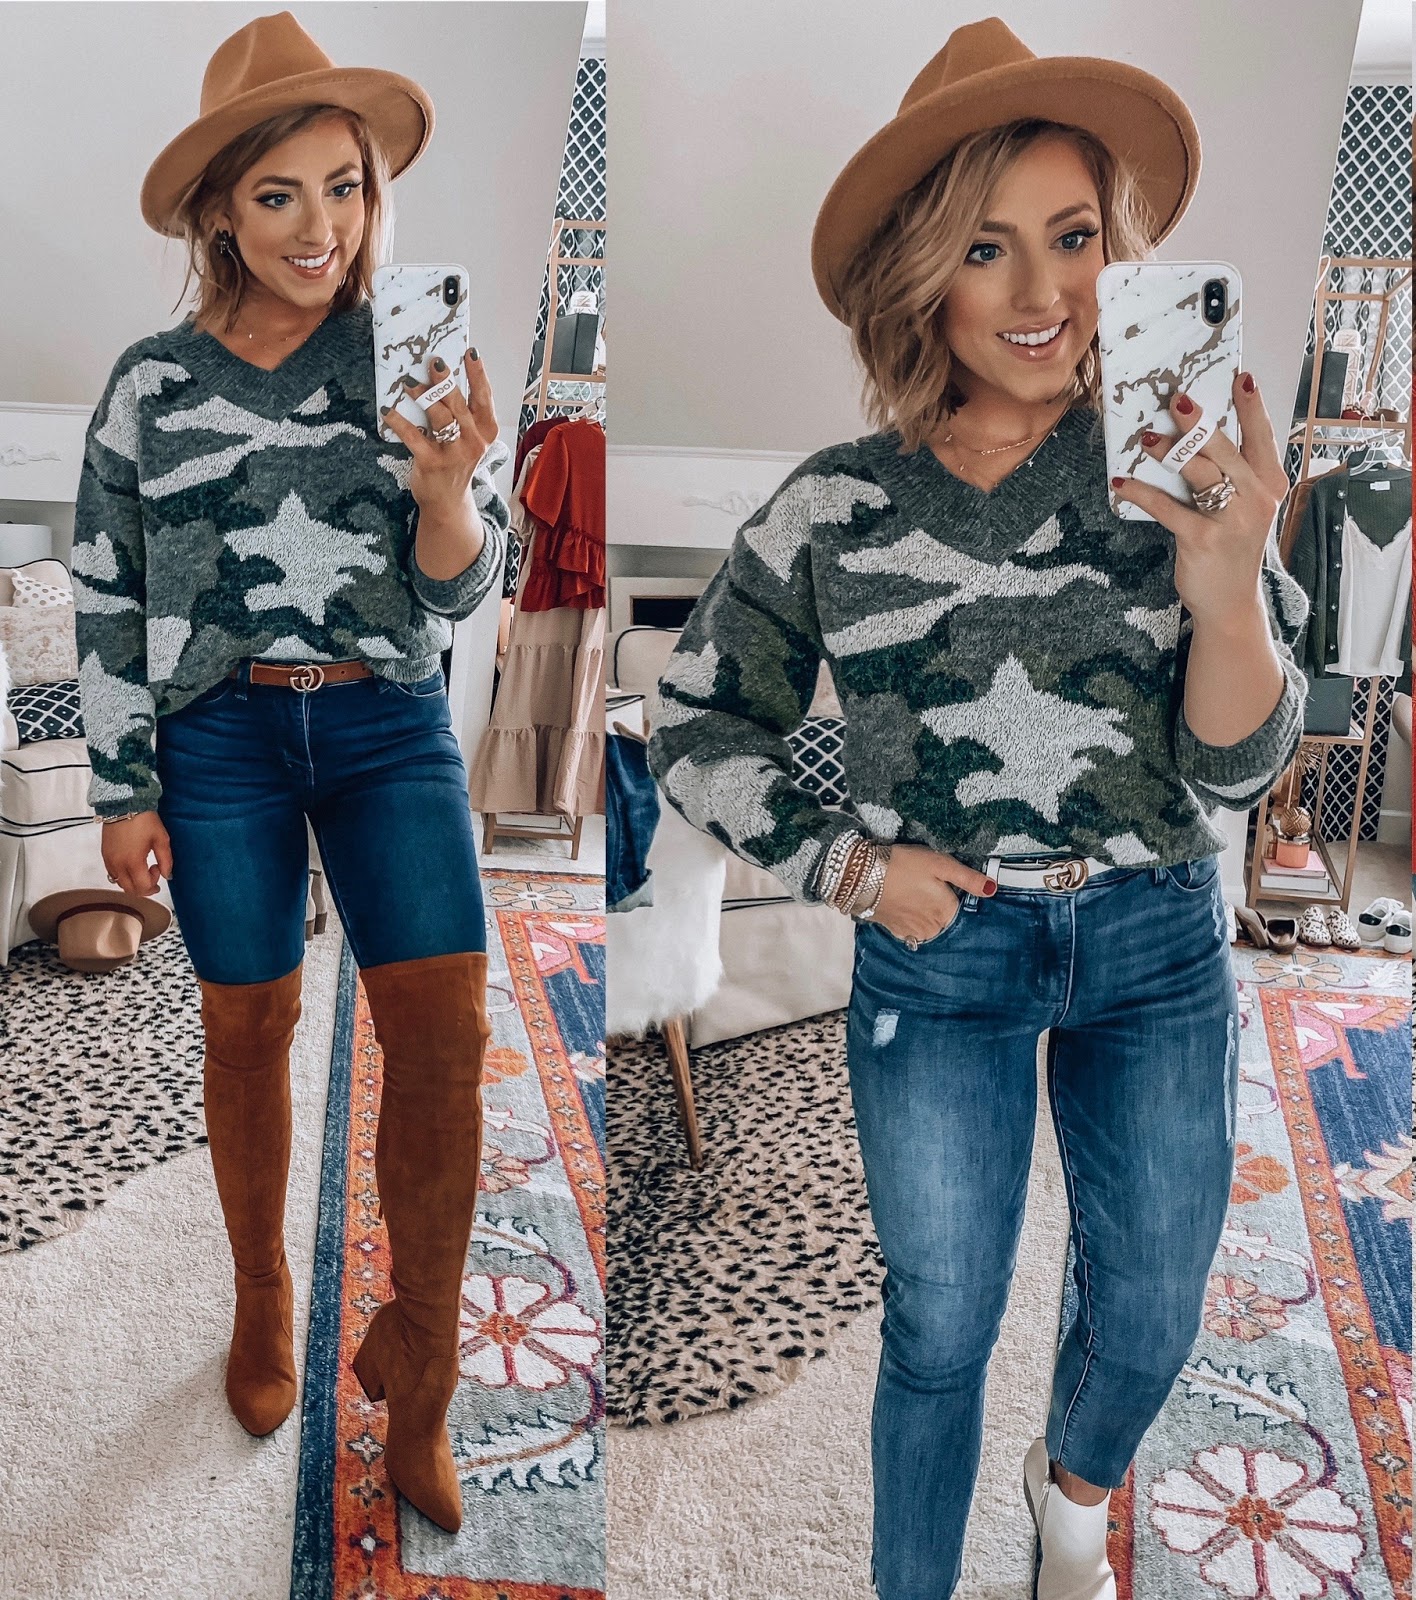 Affordable Fall Outfits: Recent Walmart (+ A Few Target and Amazon) Finds - Something Delightful Blog #fall2020 #fallfashion #falloutfits #casualstyle #everydayoutfits #walmartfashion #targetstyle